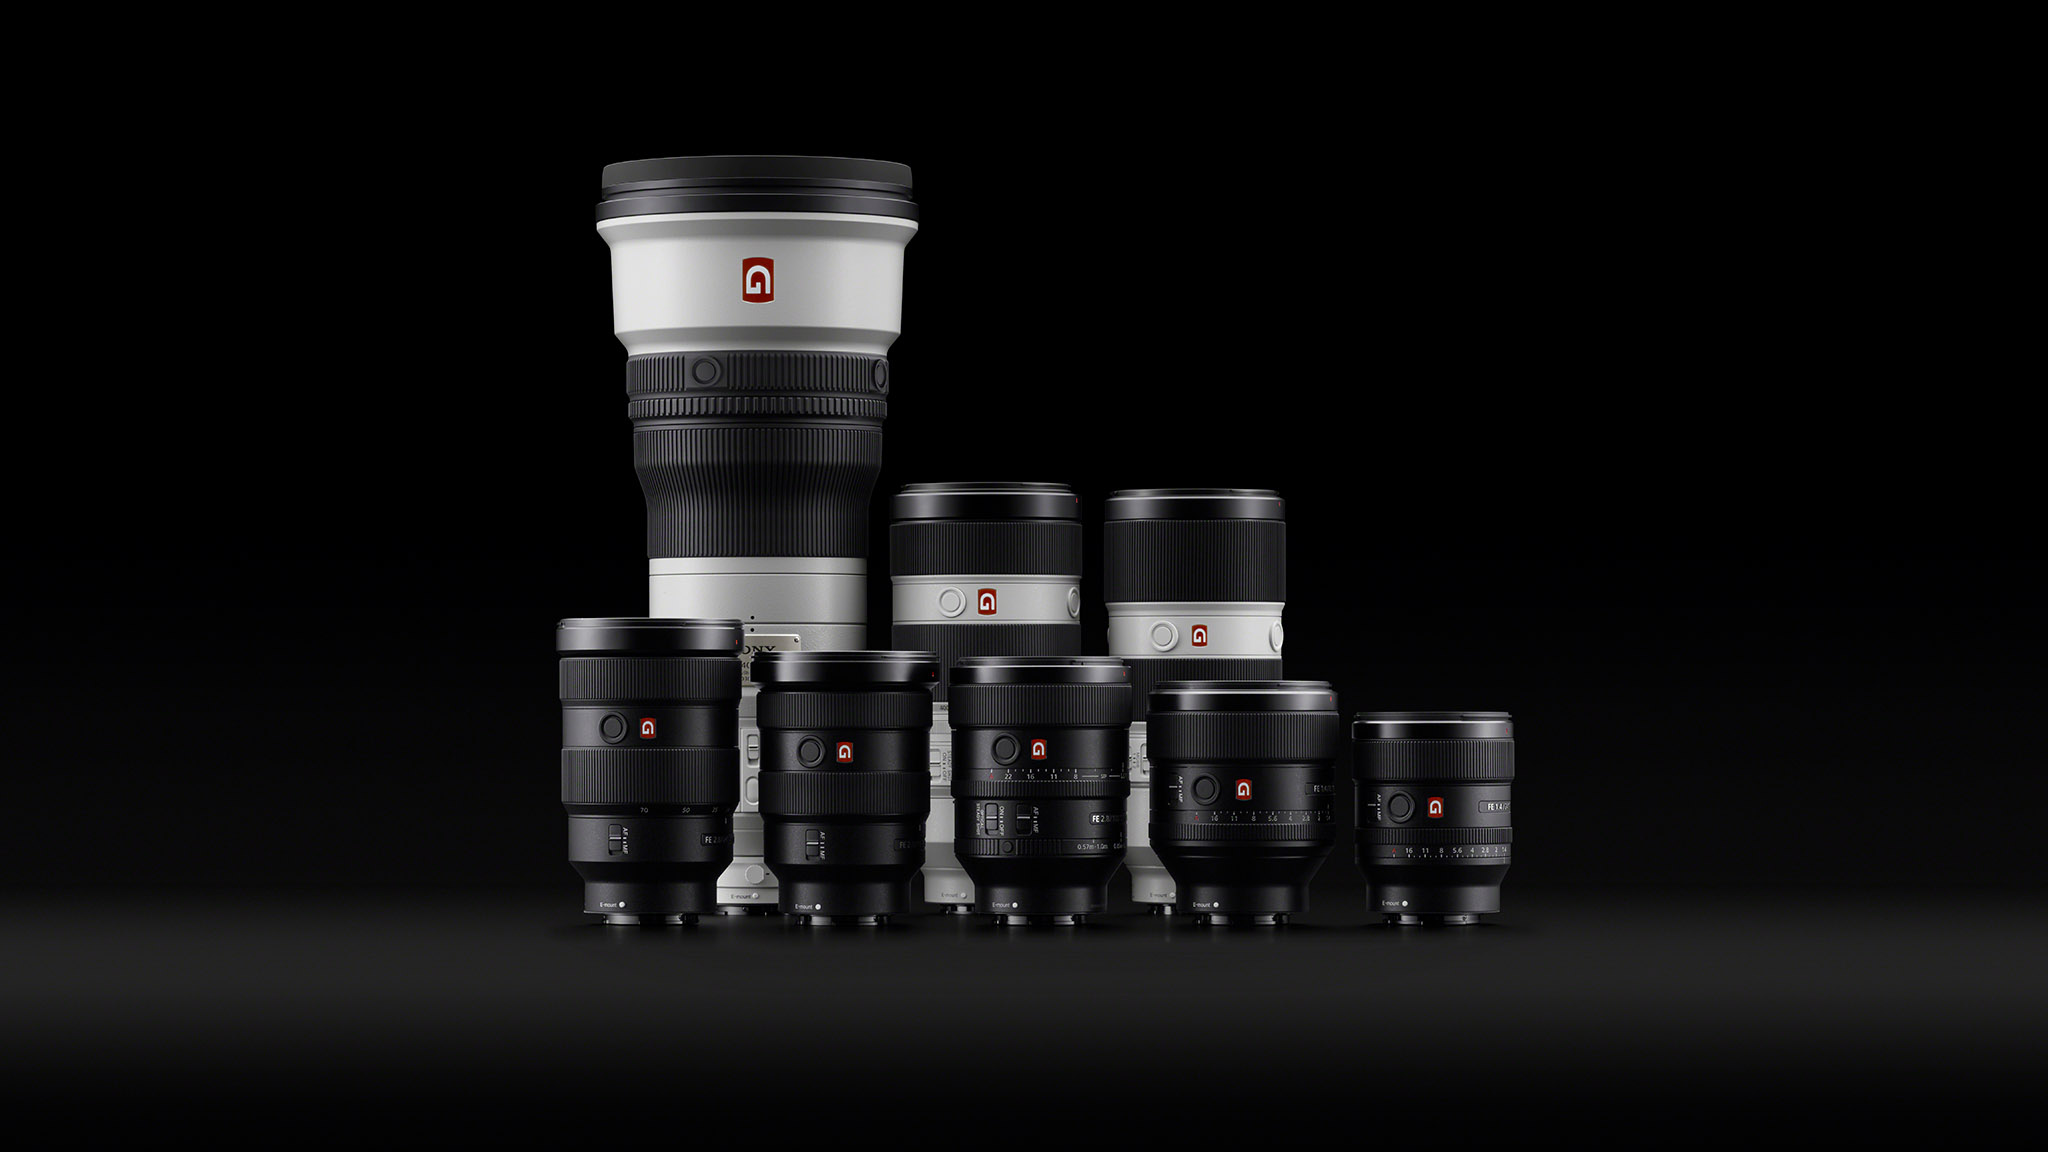 Sony's lineup of future-proof ultra high-quality GM lenses